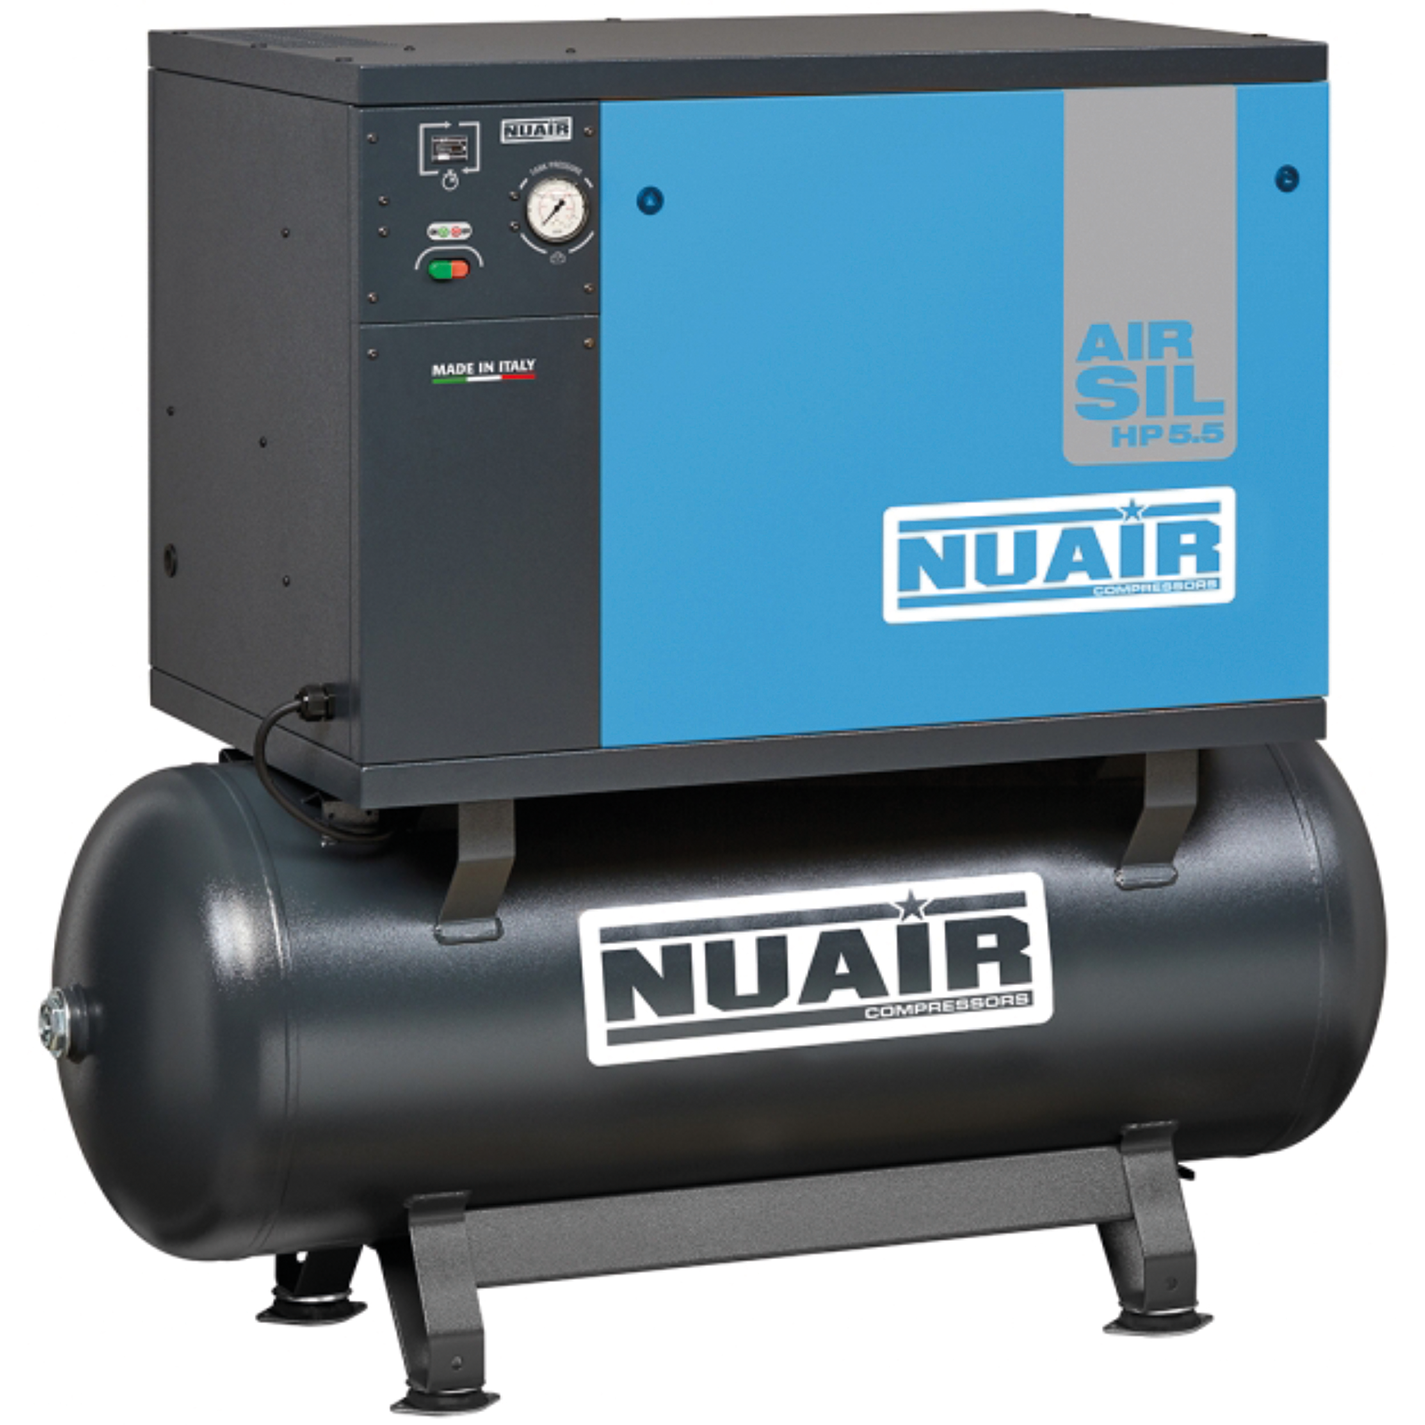 UK Suppliers of High Quality Piston Compressors